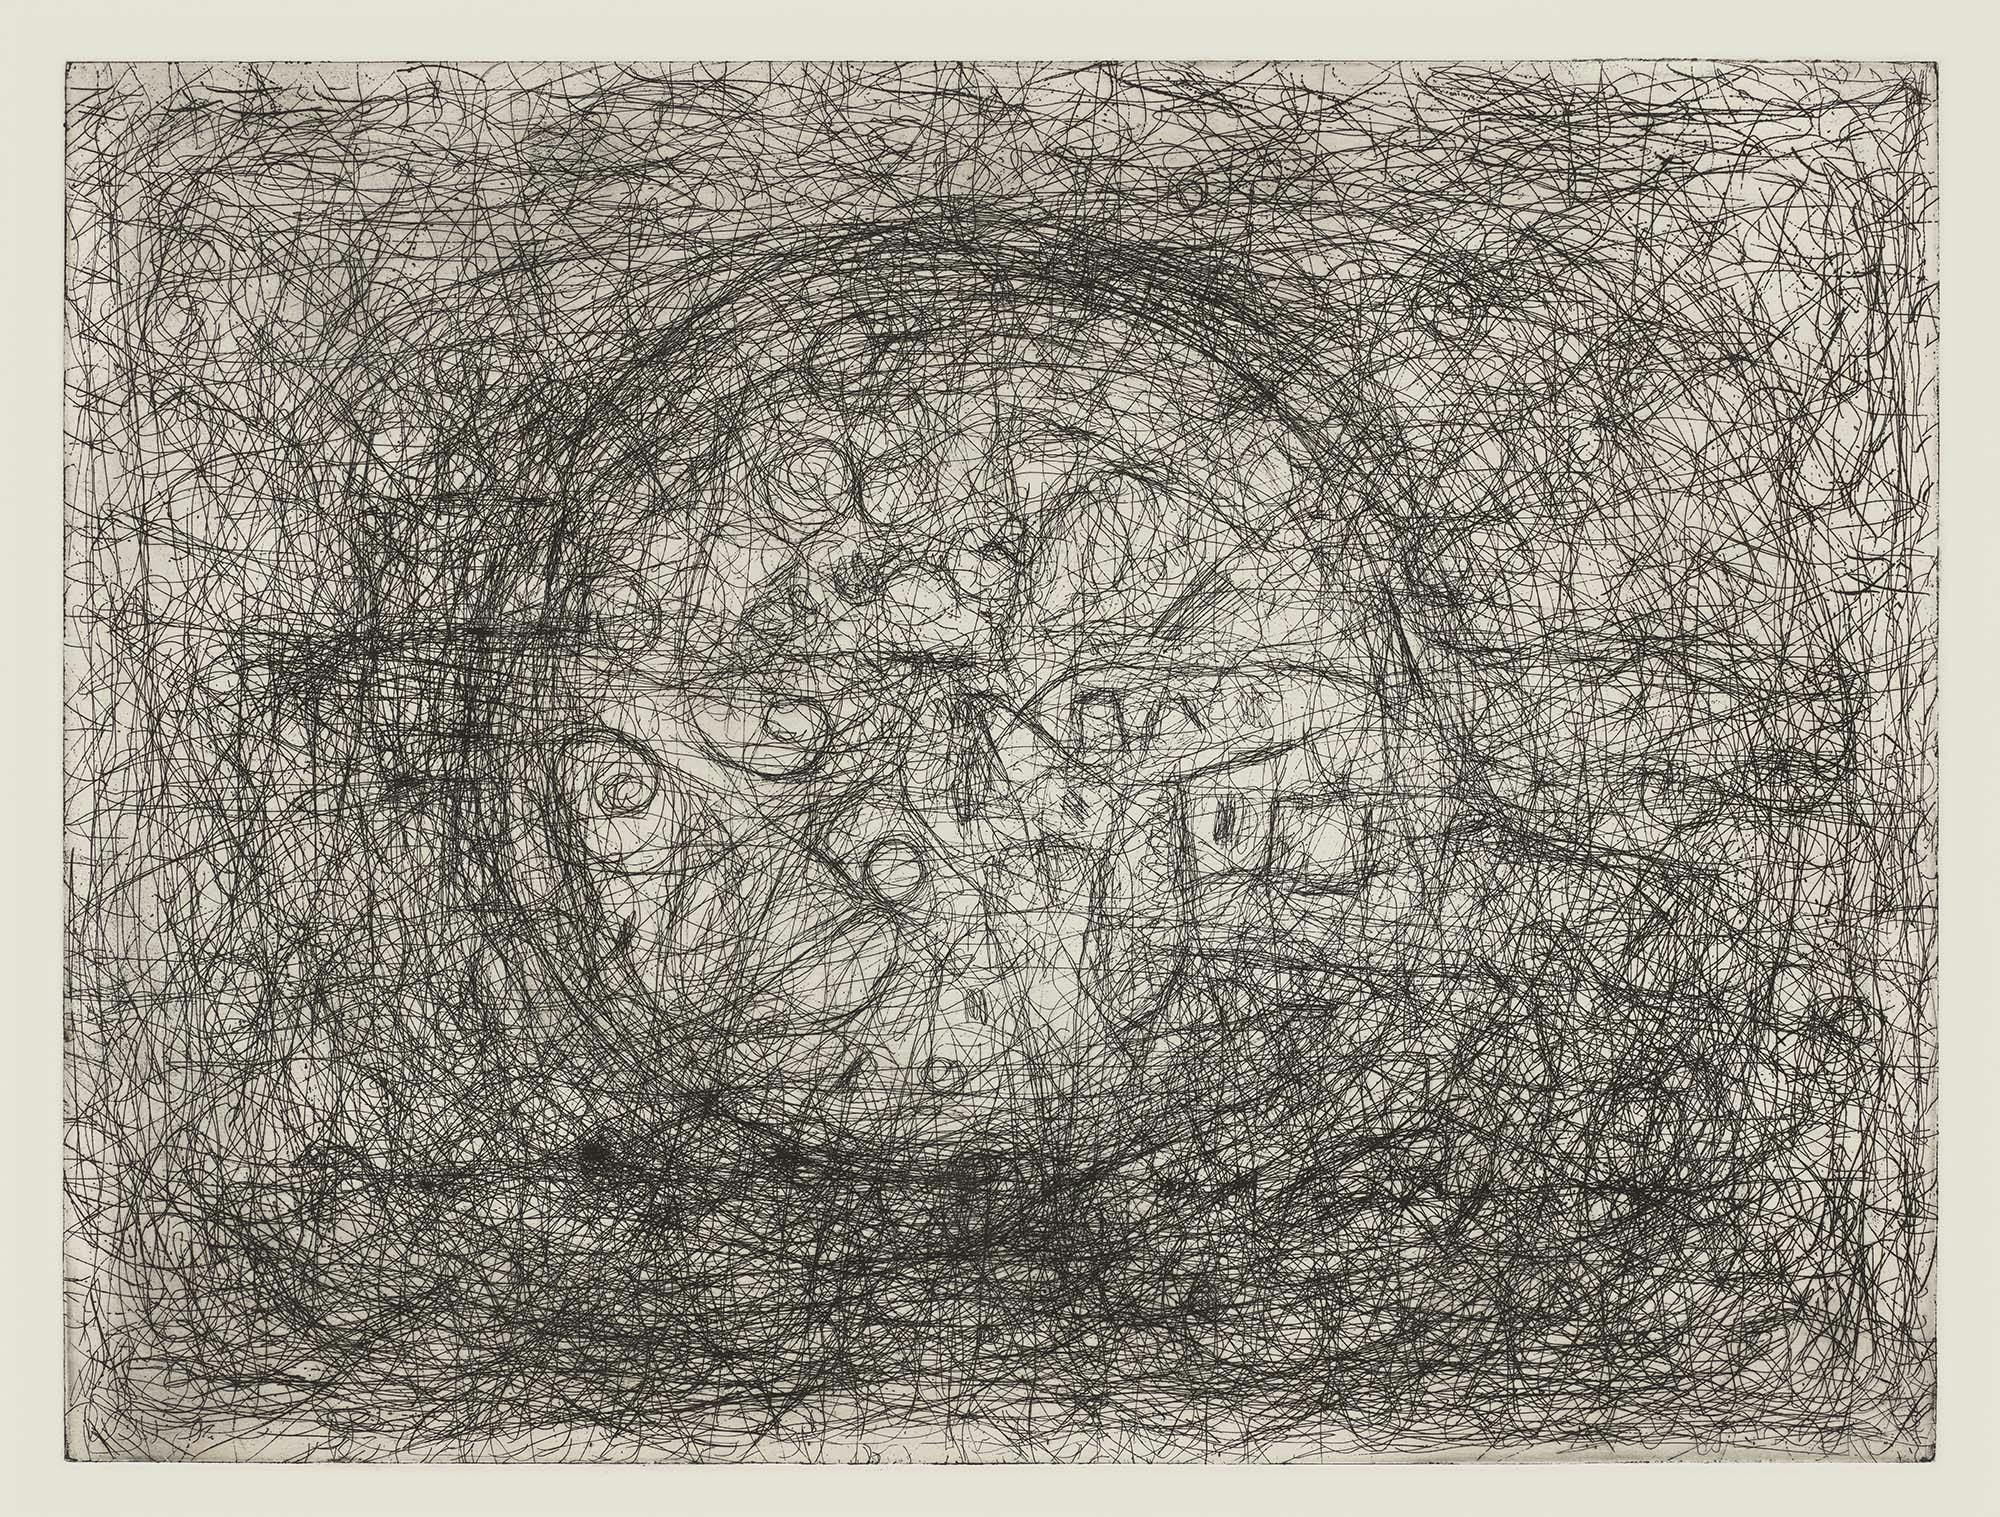 Center Being IV (Original Black Circle)
1979
Etching on paper
Sheet: 21 3/4 x 28 in. (55.2 x 71.1 cm)
 – The Richard Pousette-Dart Foundation